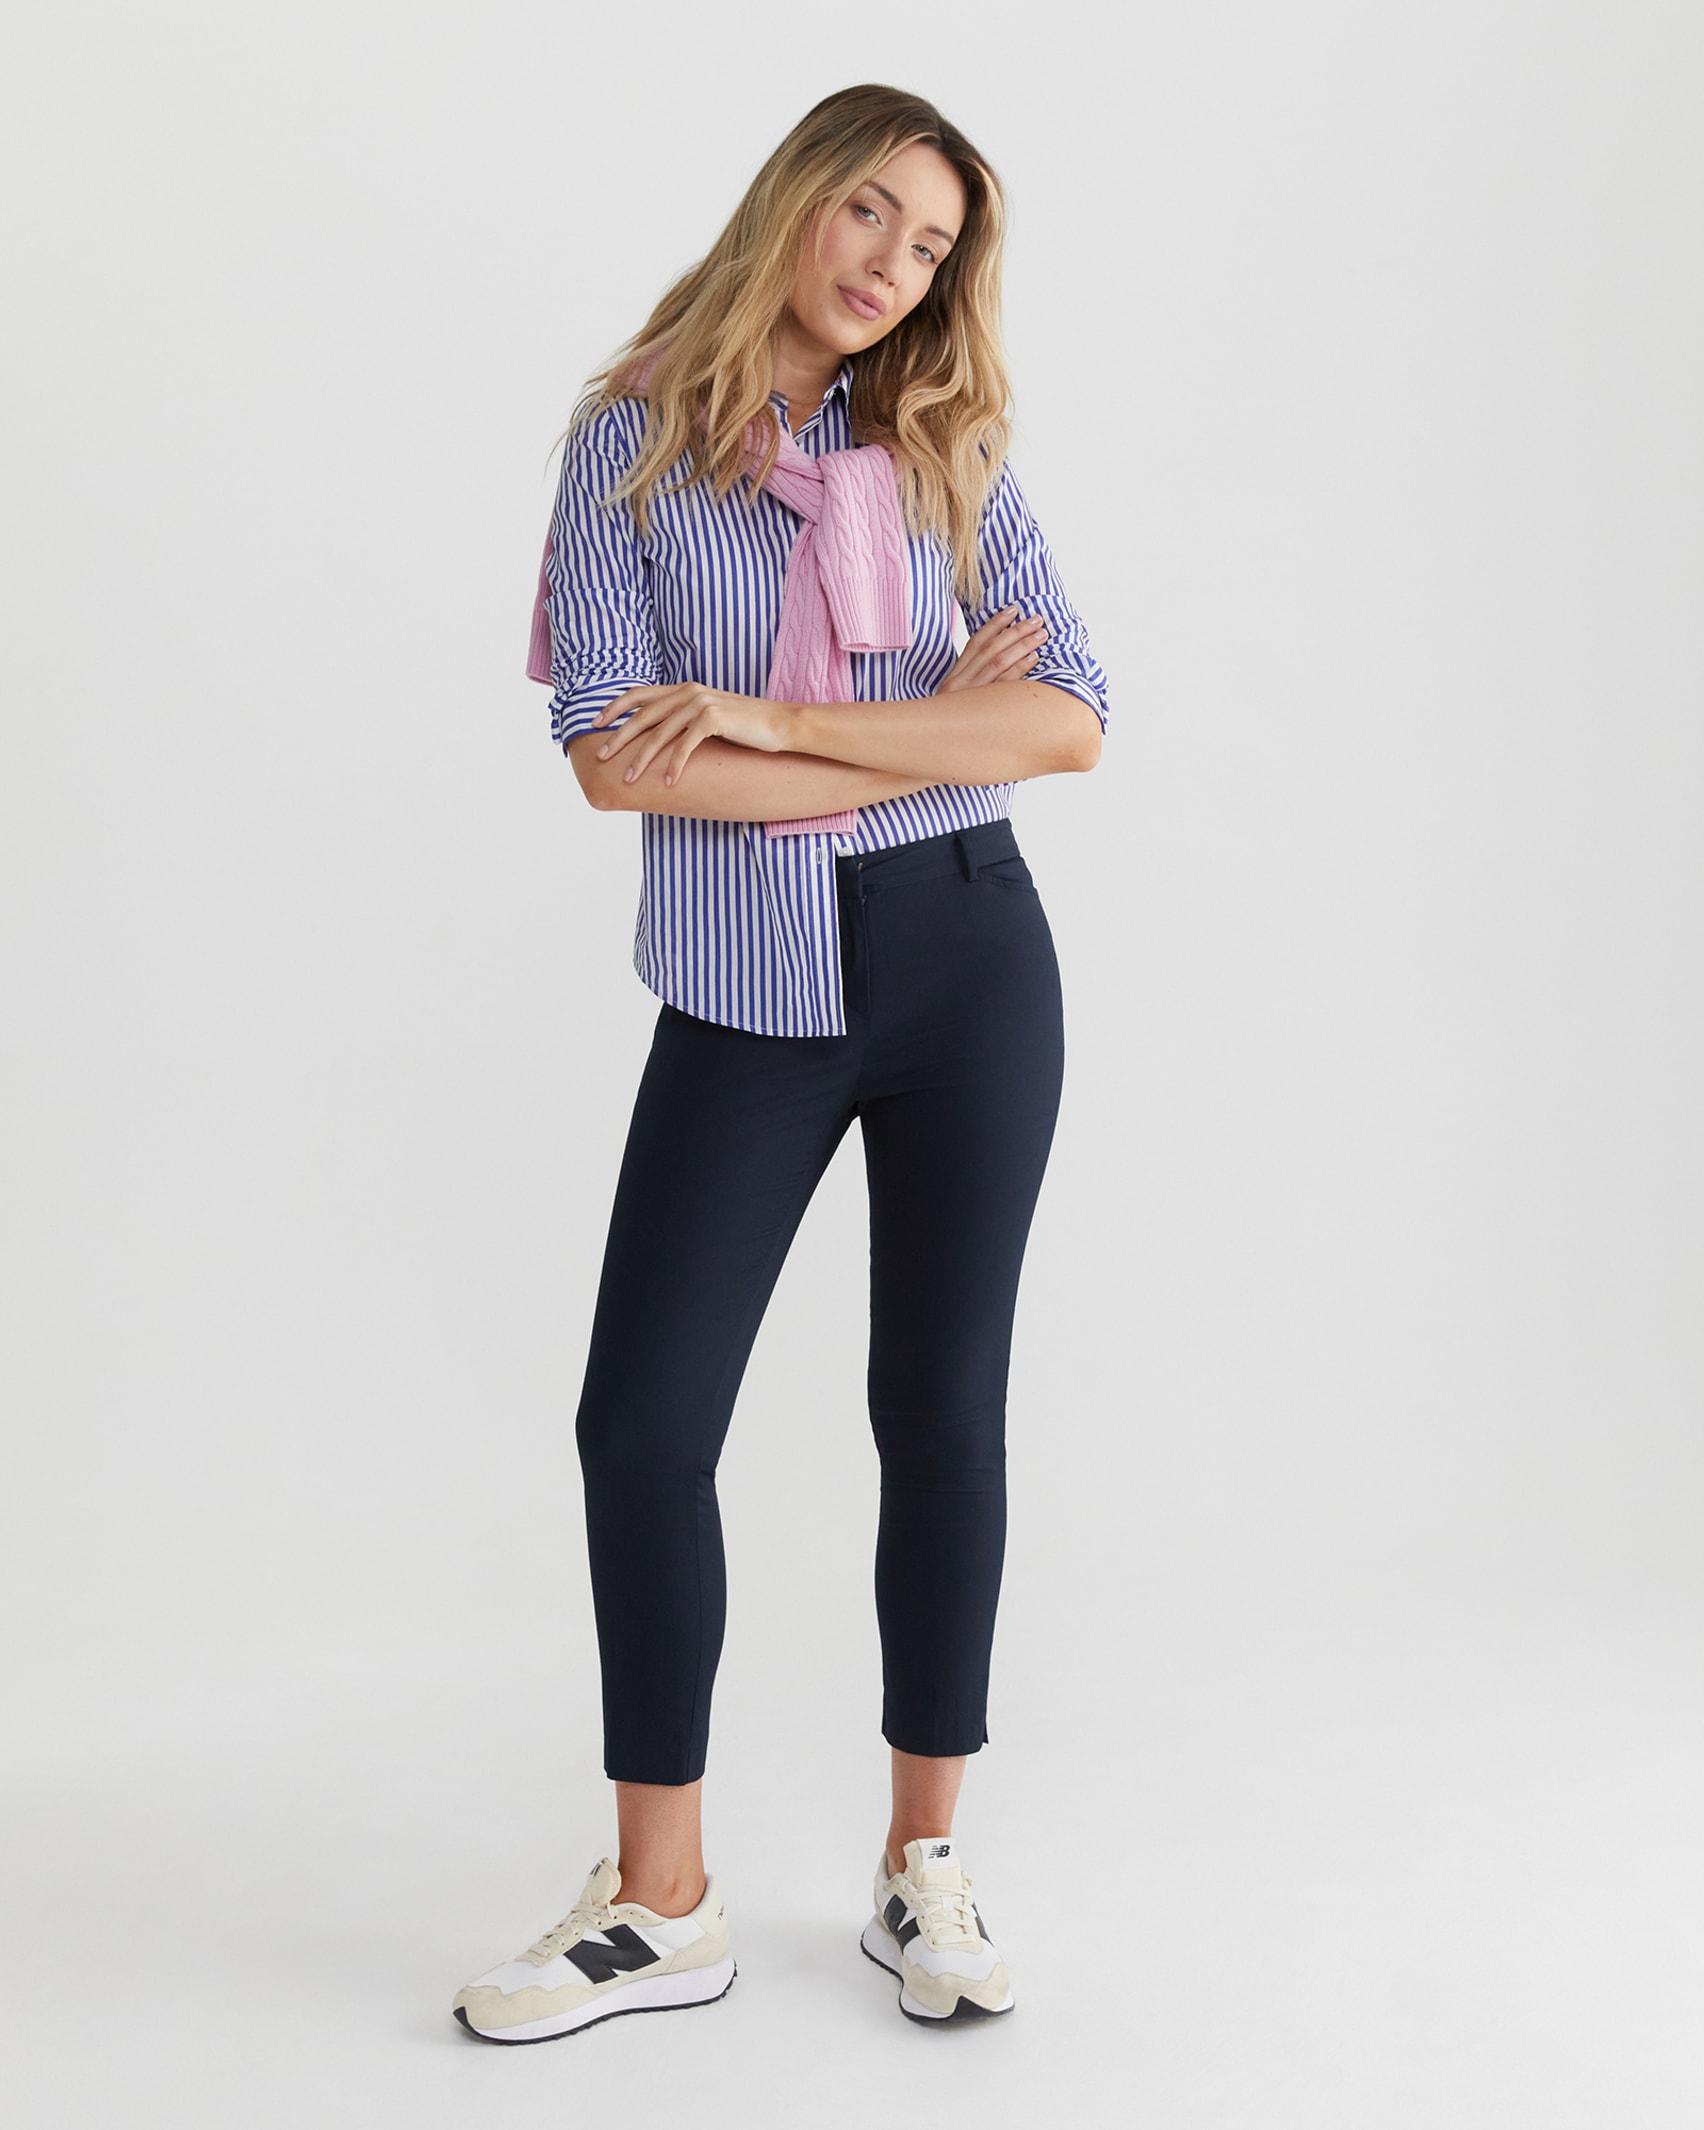 Stripe Lily Voile Shirt in BLUE/WHITE